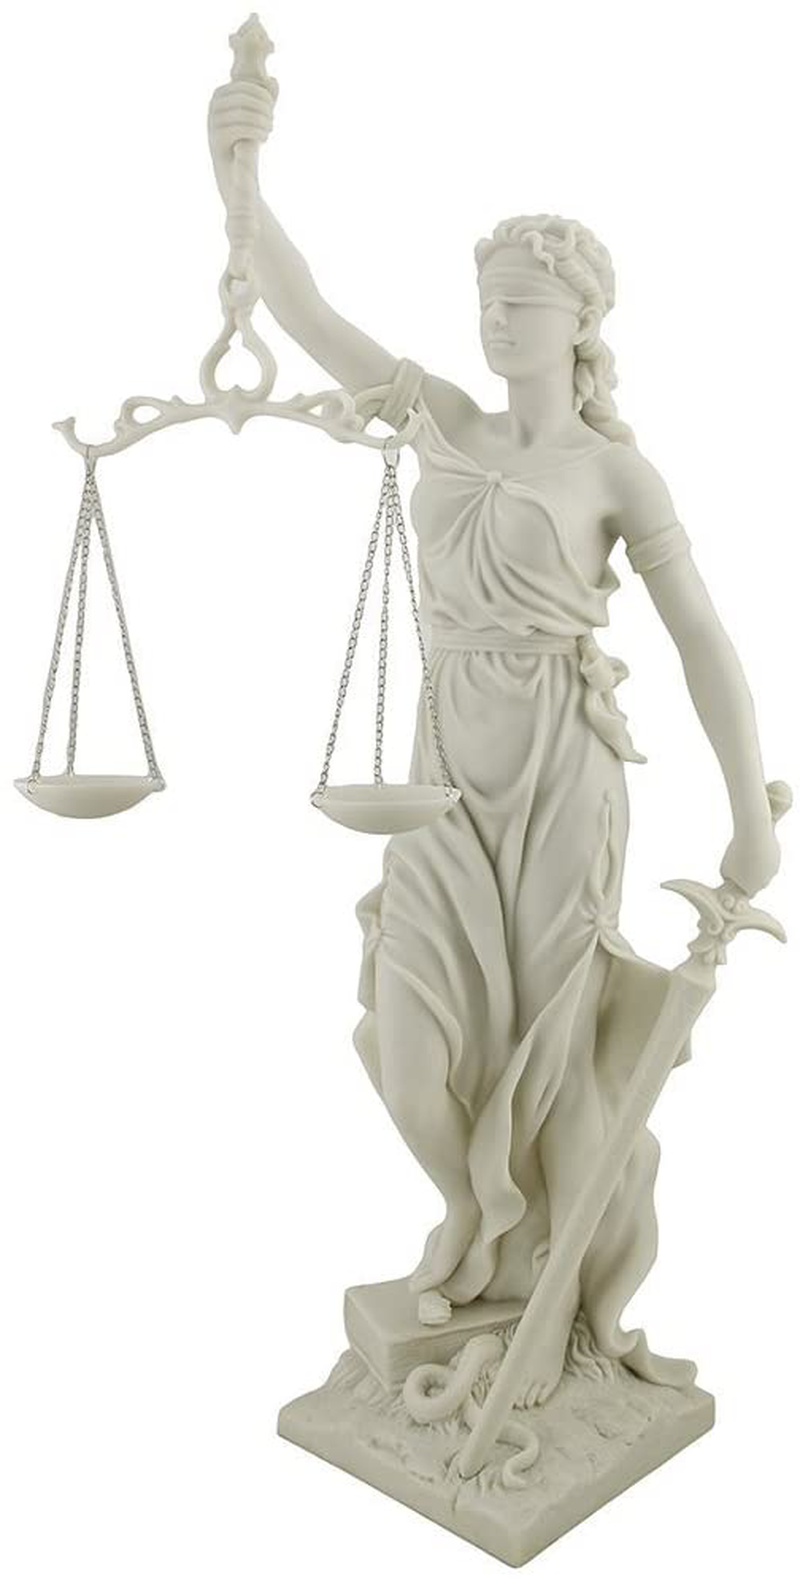 Top Collection 12.5 Inch Lady Justice Statue Sculpture. Premium Resin - White Marble Finish.